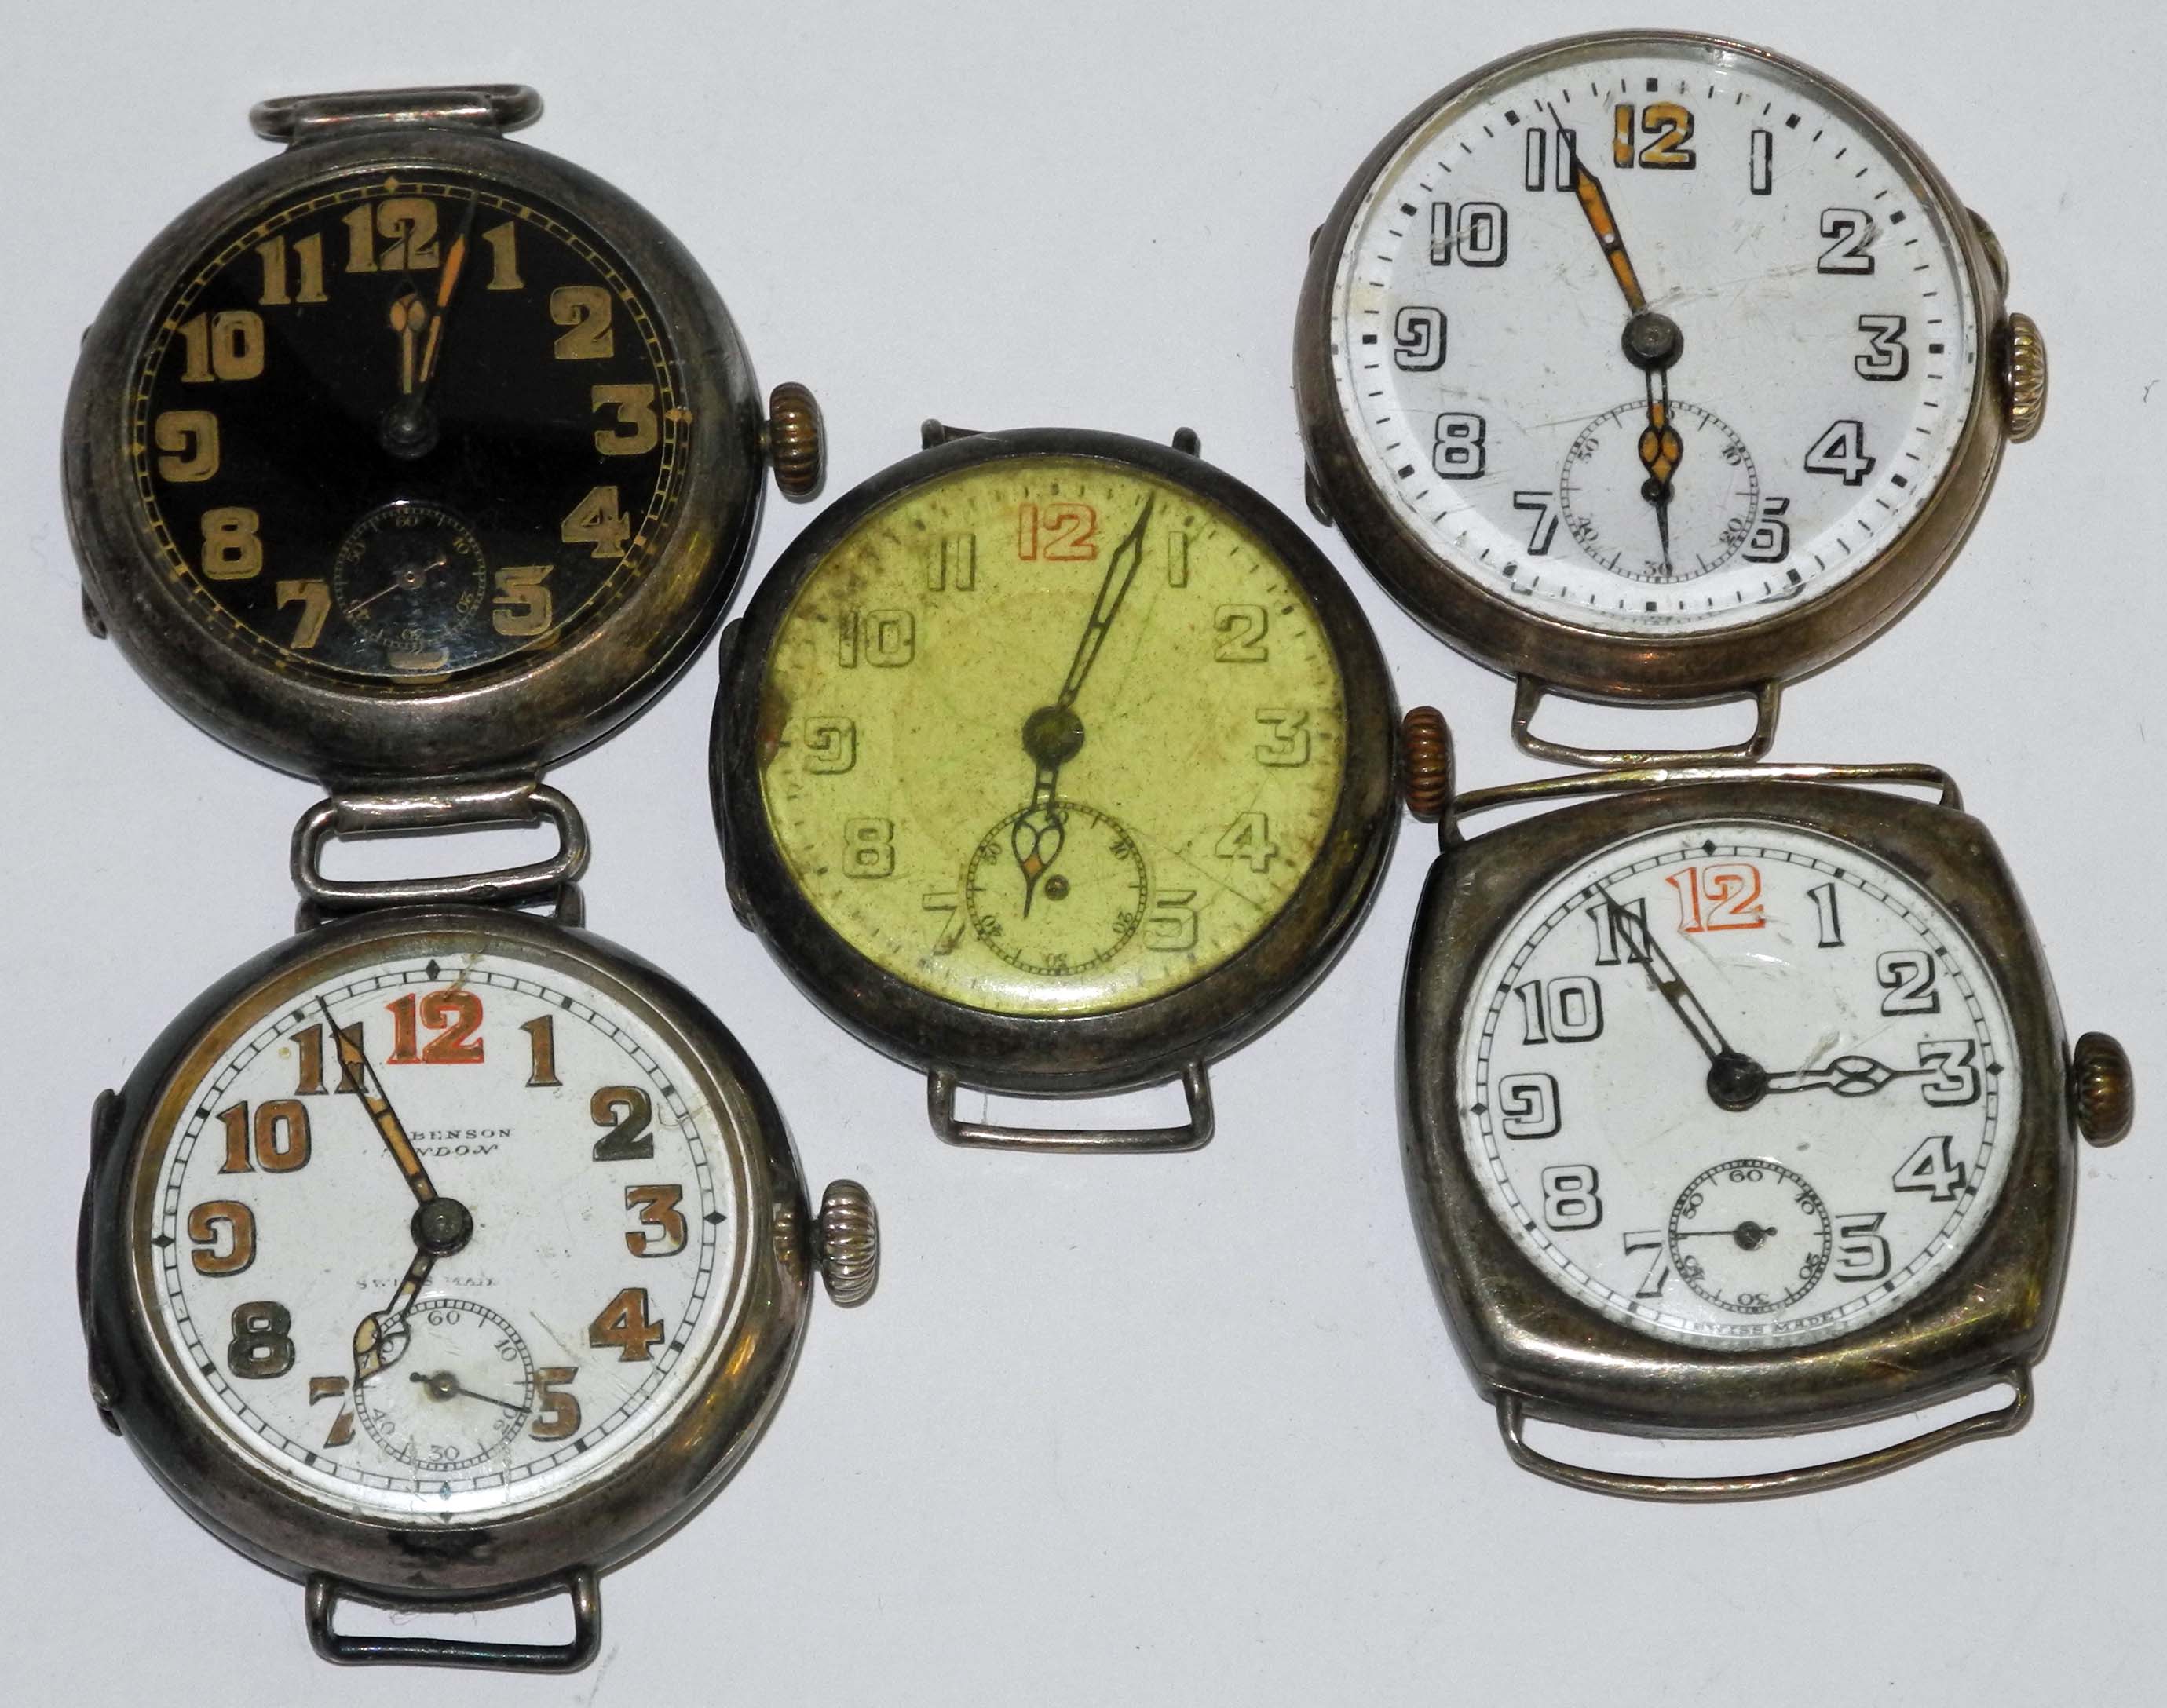 Five early 20th century Trench-type wrist watches, to include a Buren military watch, with black